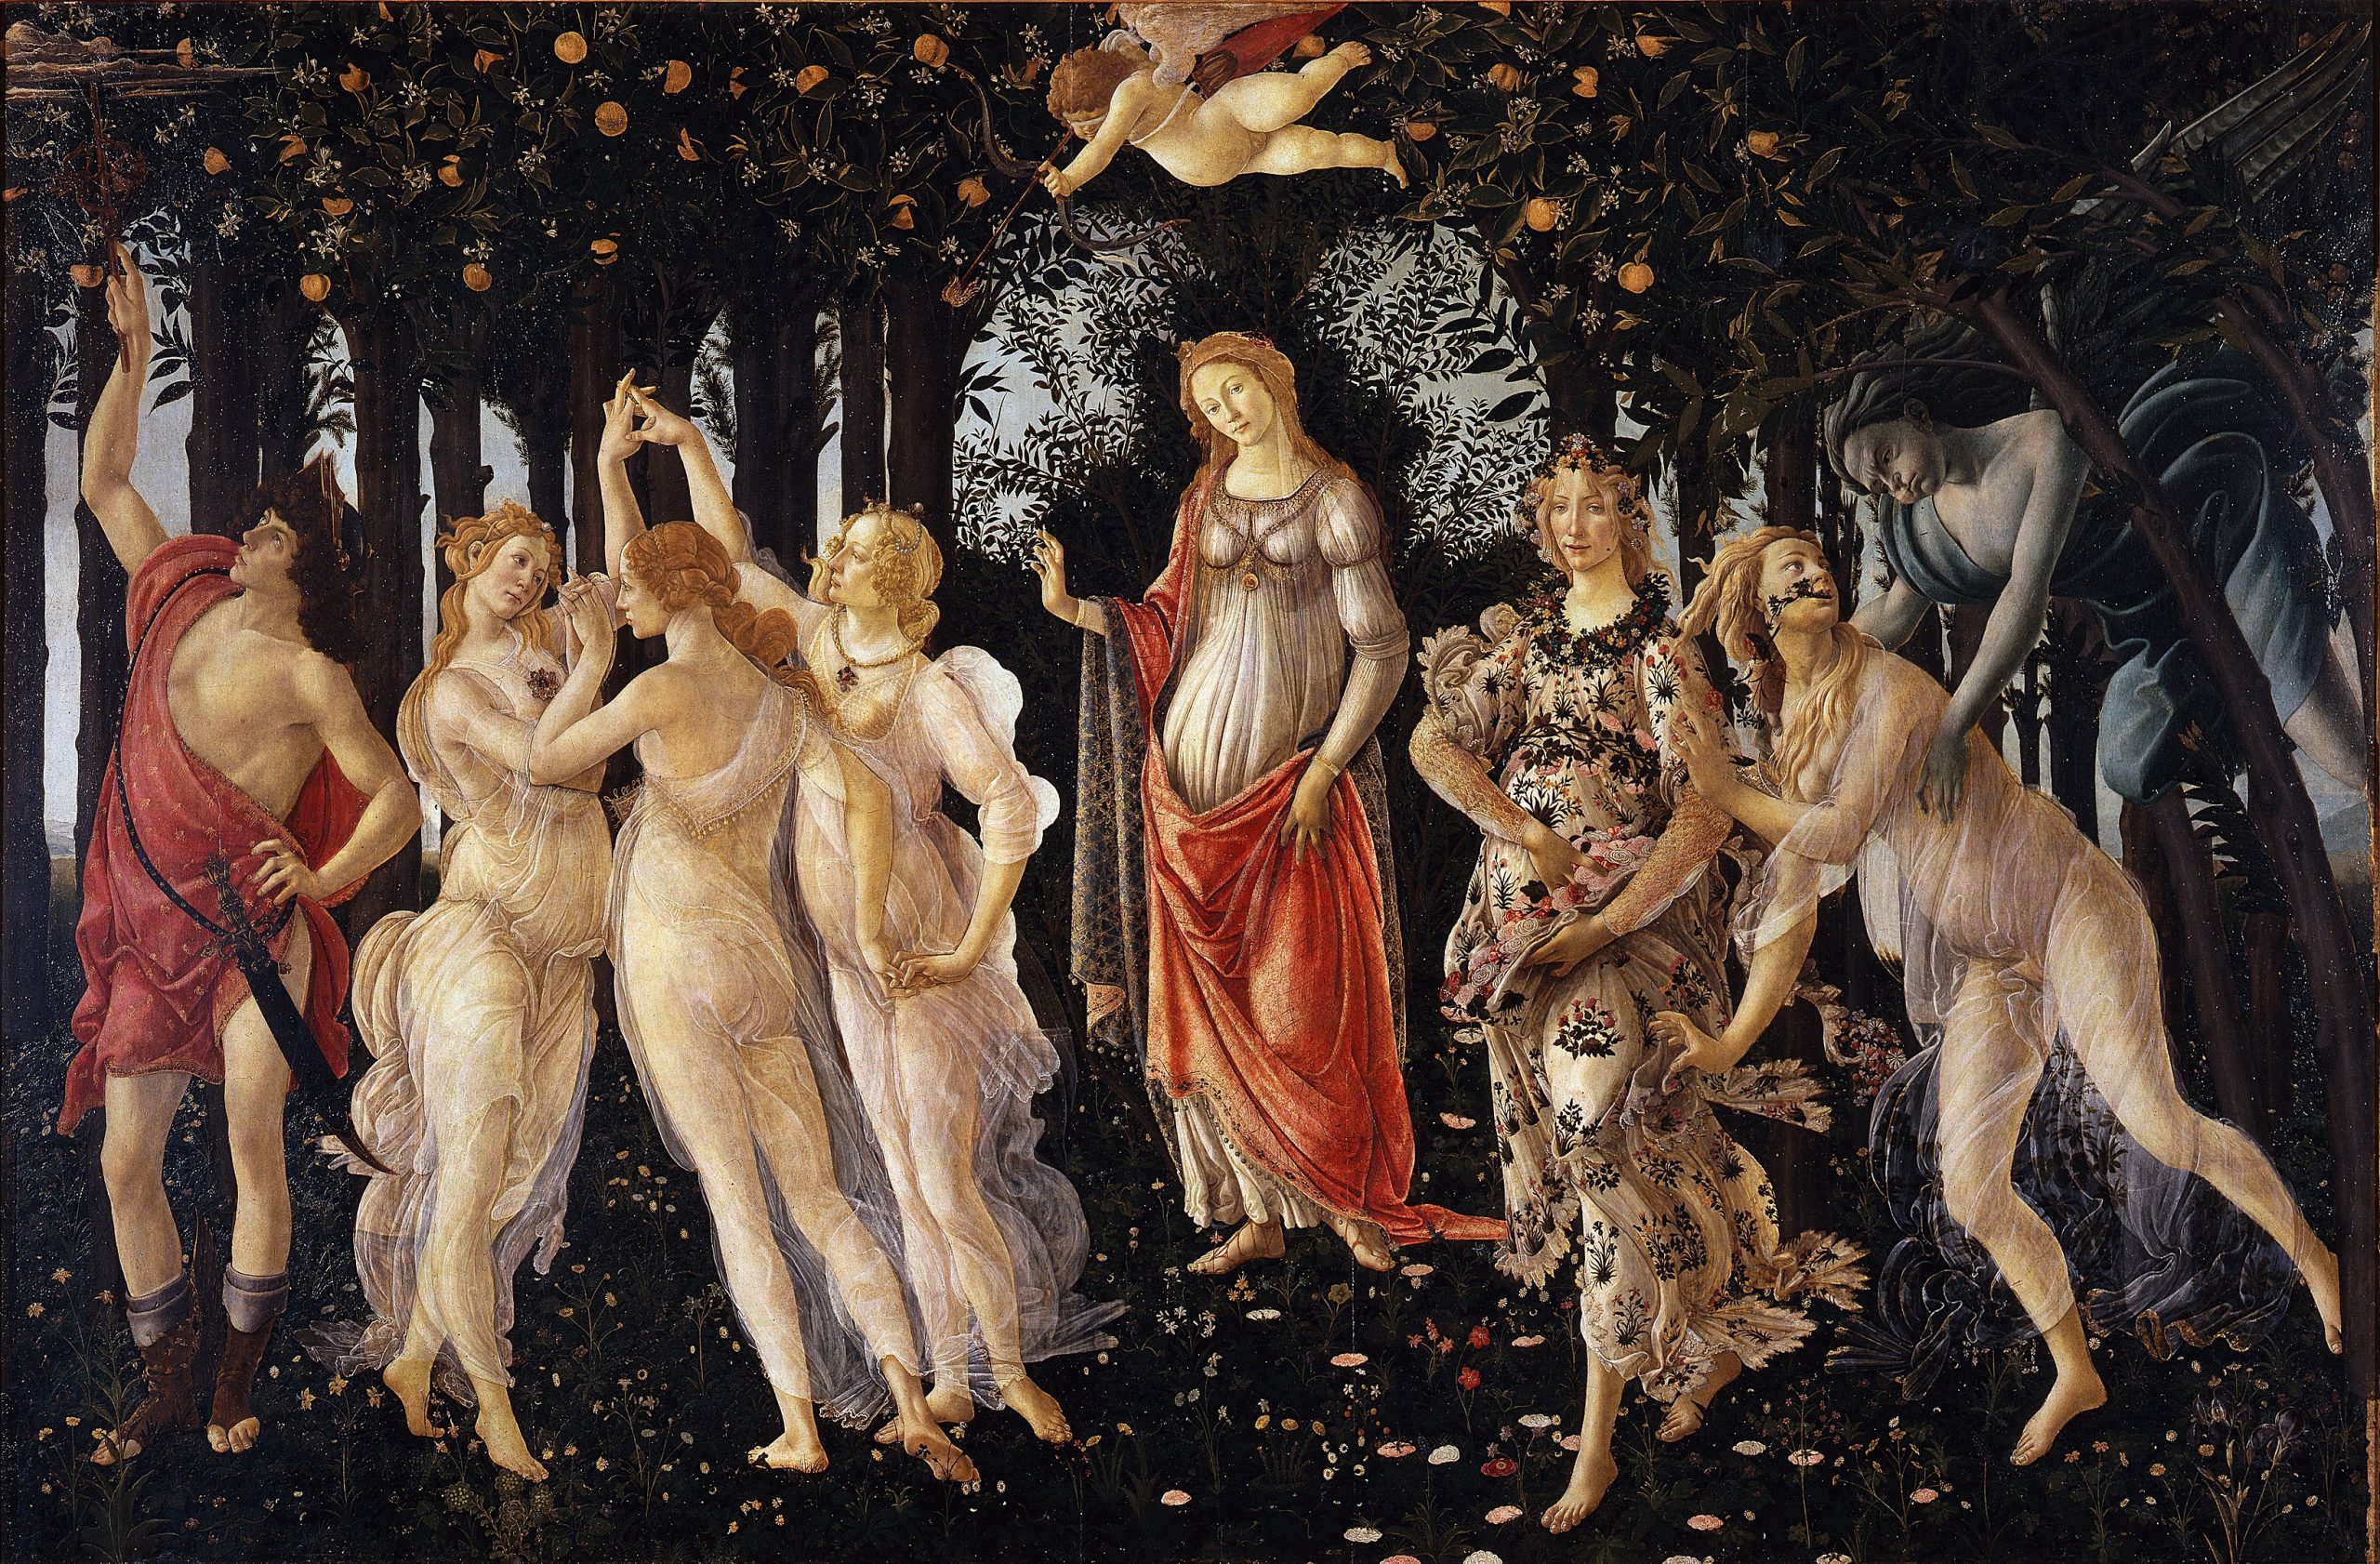 Nine figures from classical mythology engaging in various activities in a forest